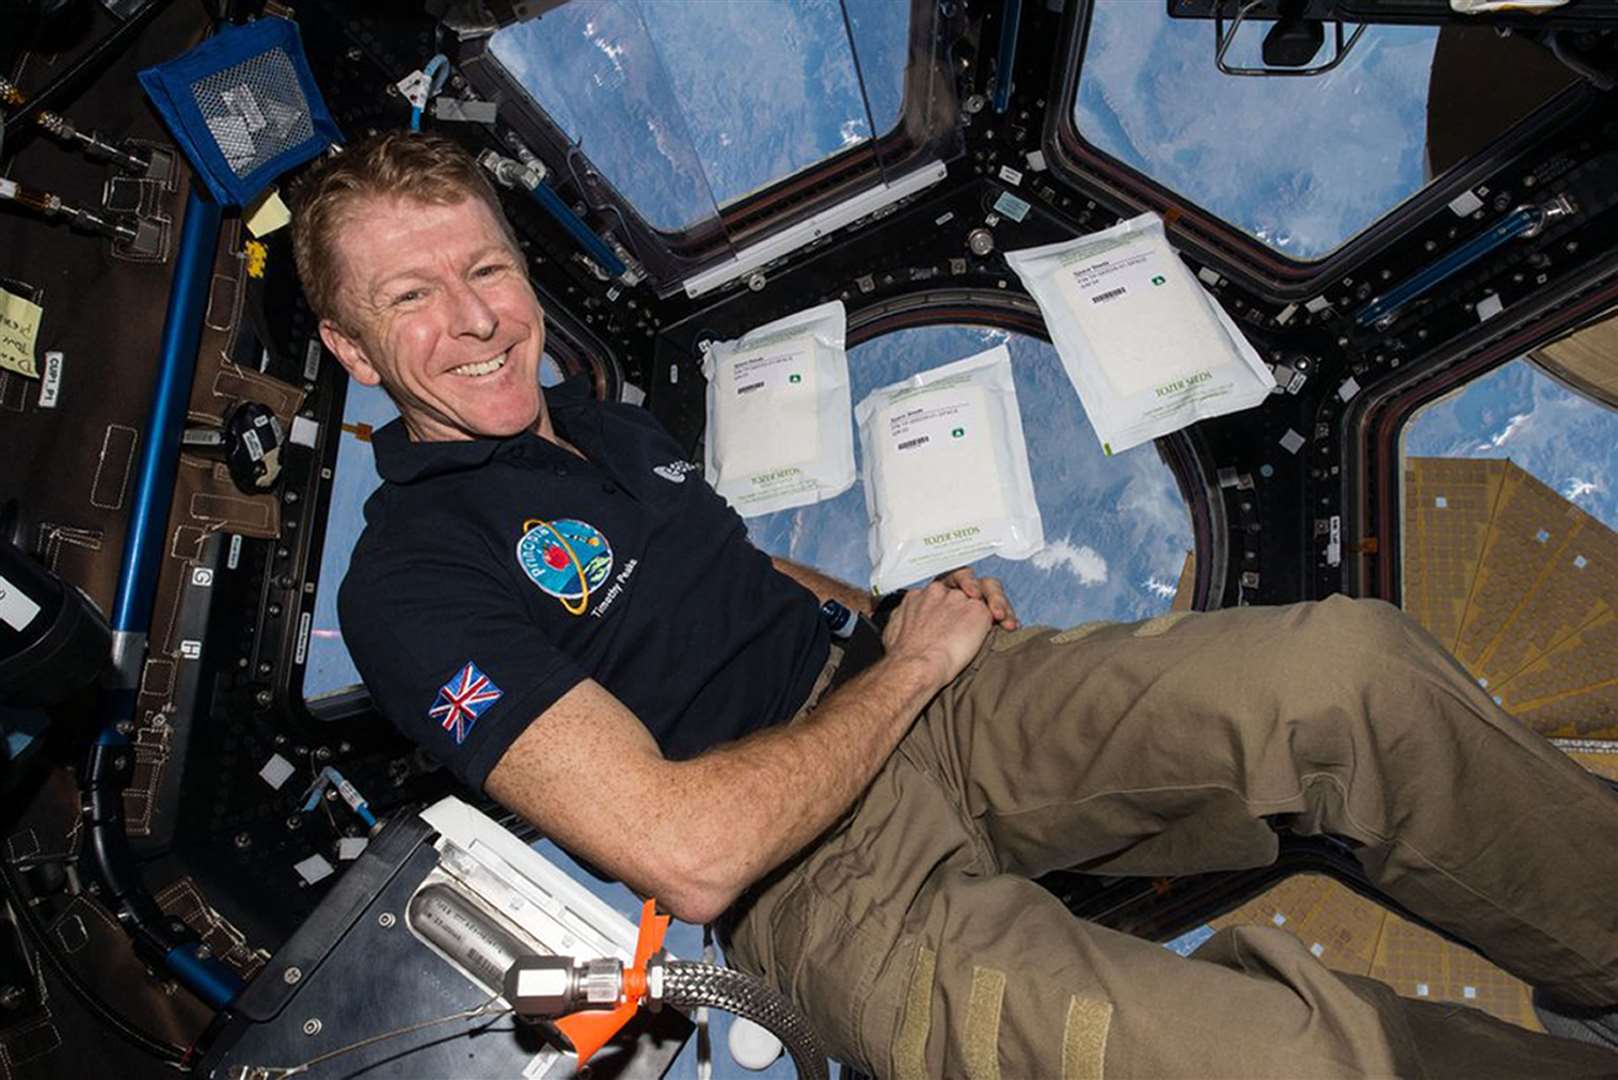 Tim Peake took charge of two kilograms of rocket seeds during his stay on the space station (ESA)